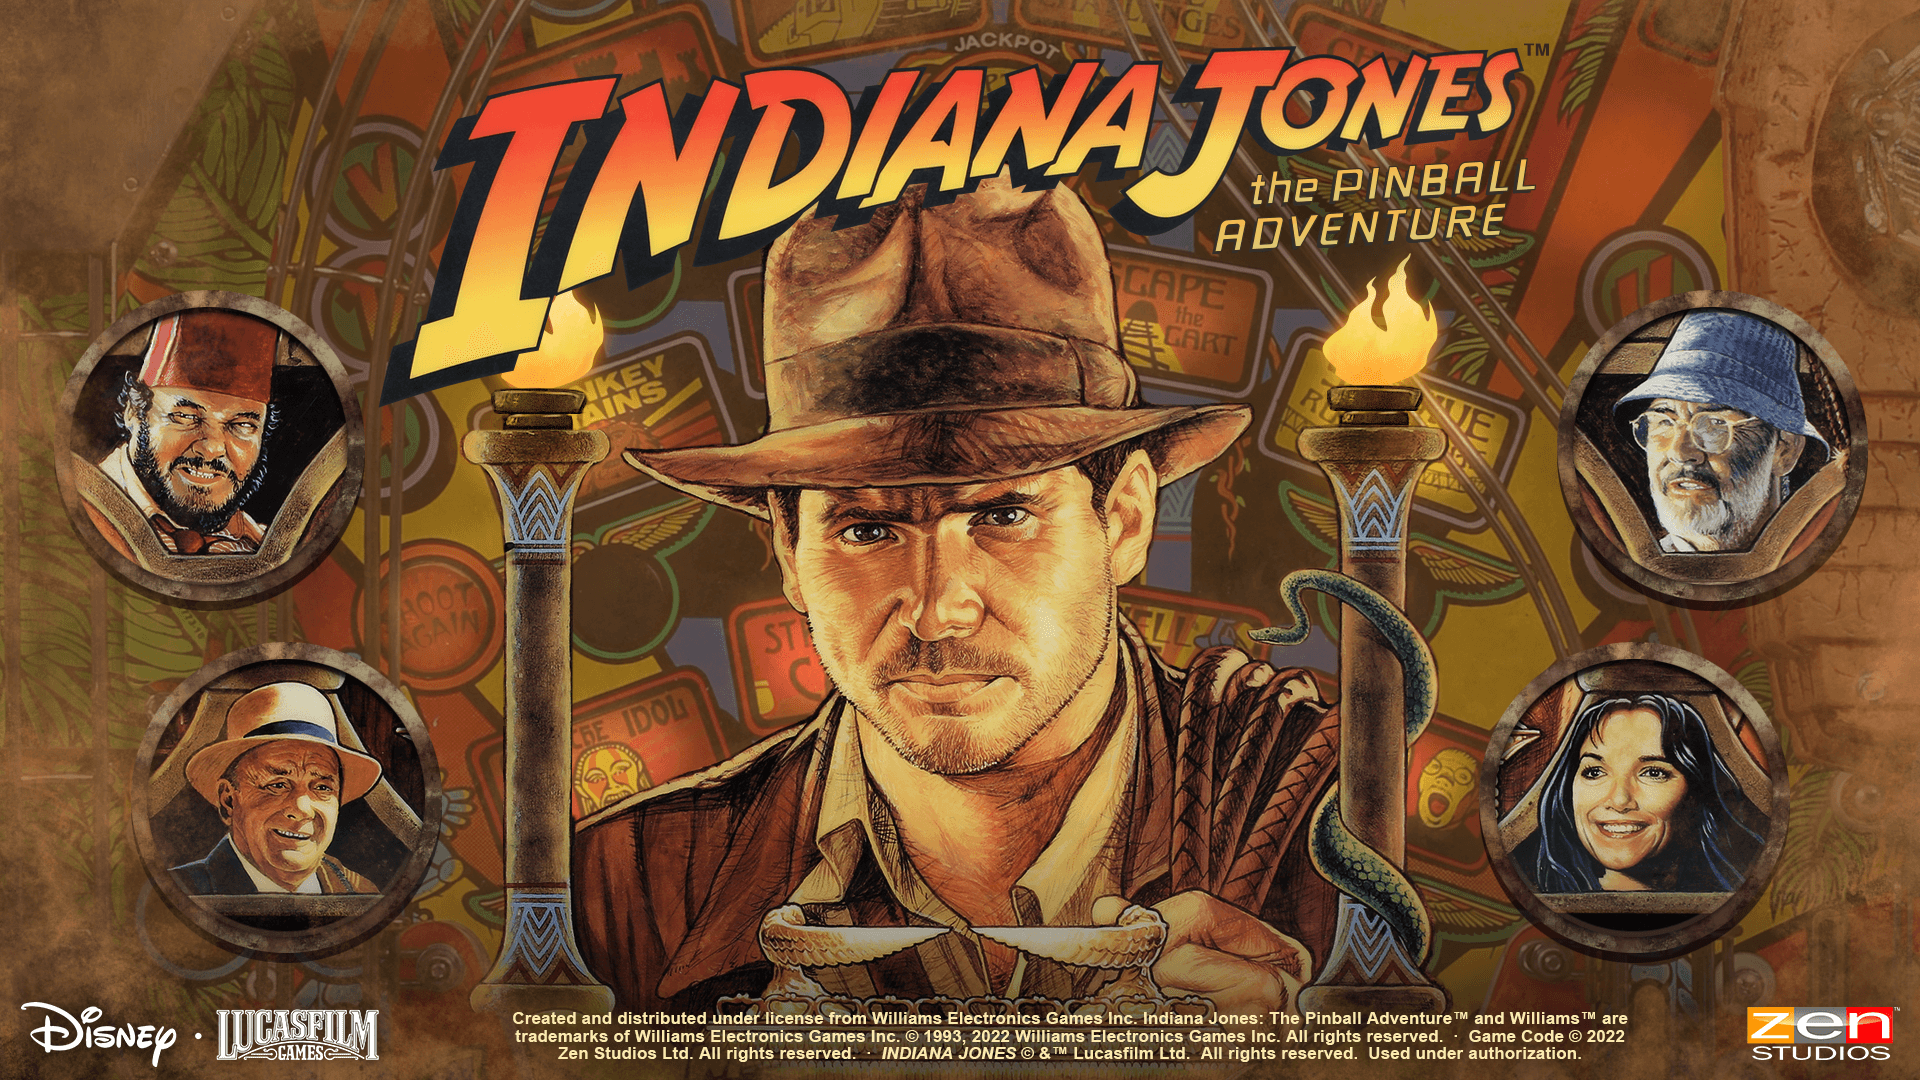 BlahCade 237: Indiana Jones and the Costs of Licensing